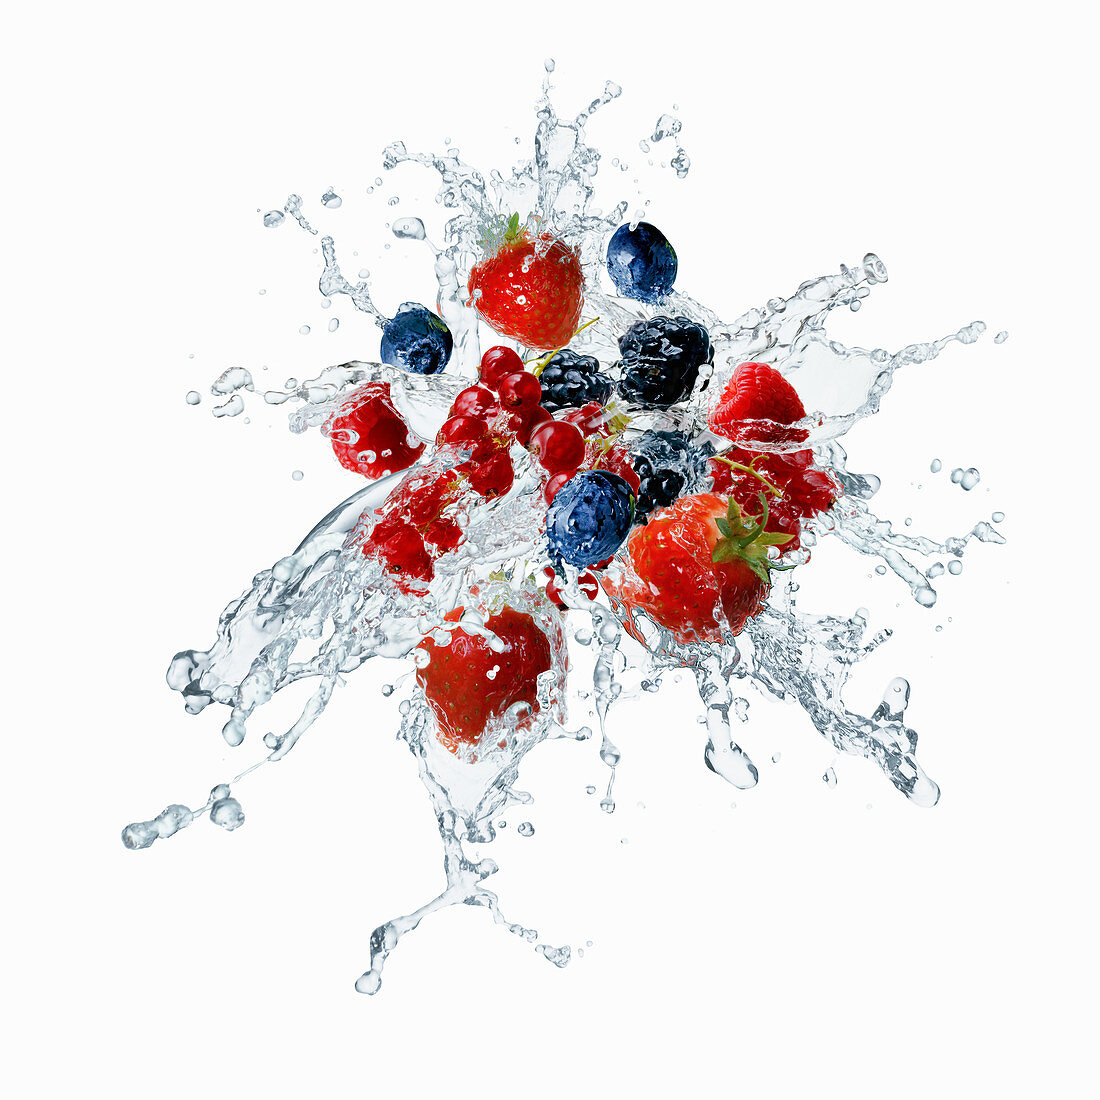 Berries with a splash of water